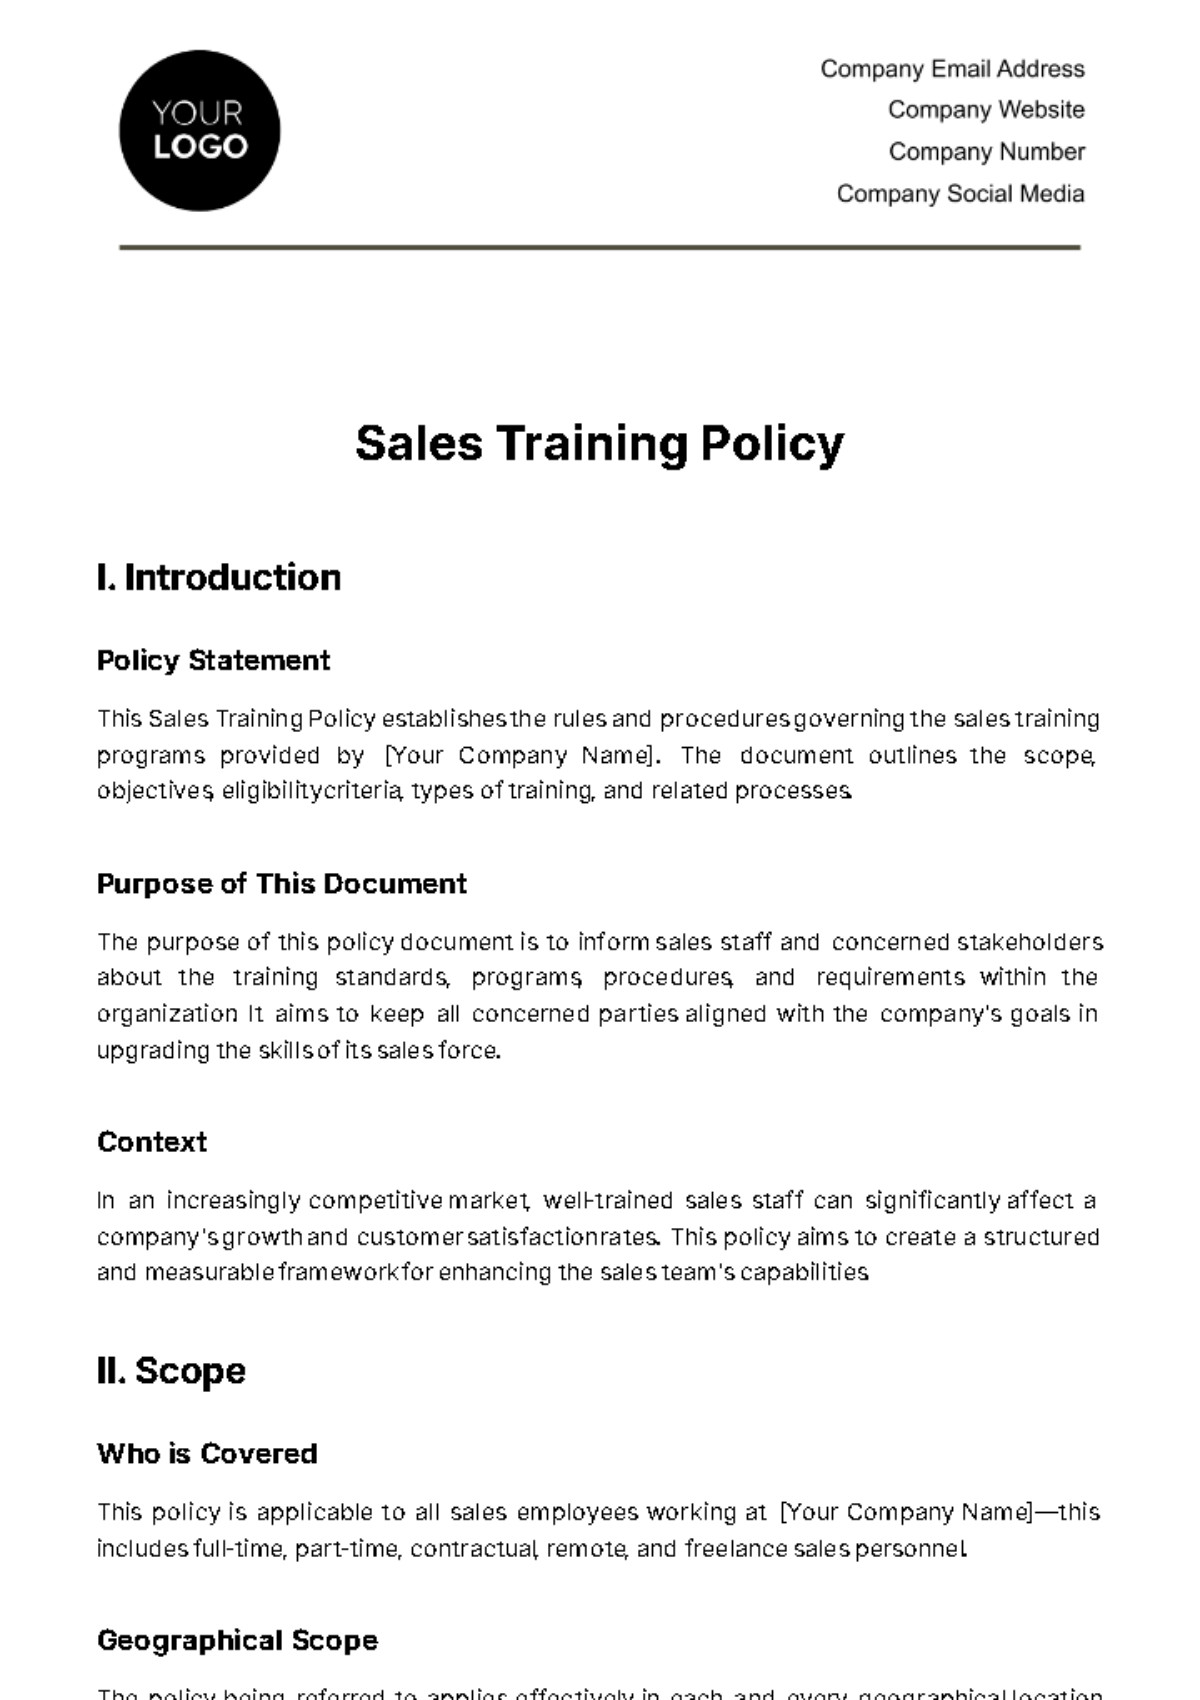 Free Sales Training Policy Template